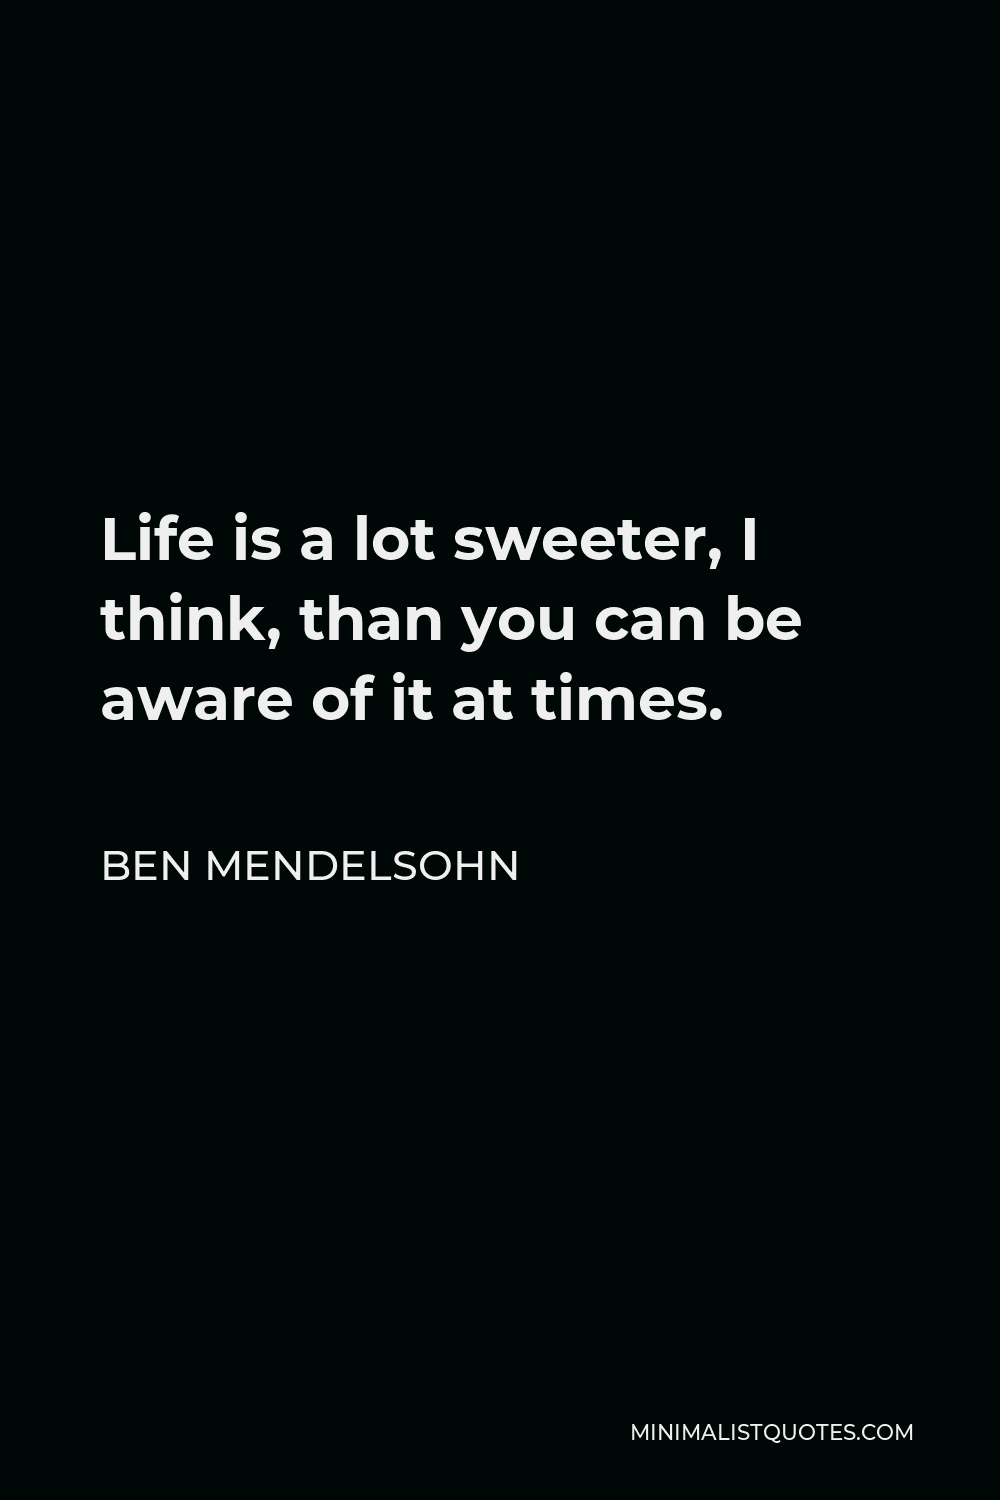 Ben Mendelsohn Quote - Life is a lot sweeter, I think, than you can be aware of it at times.